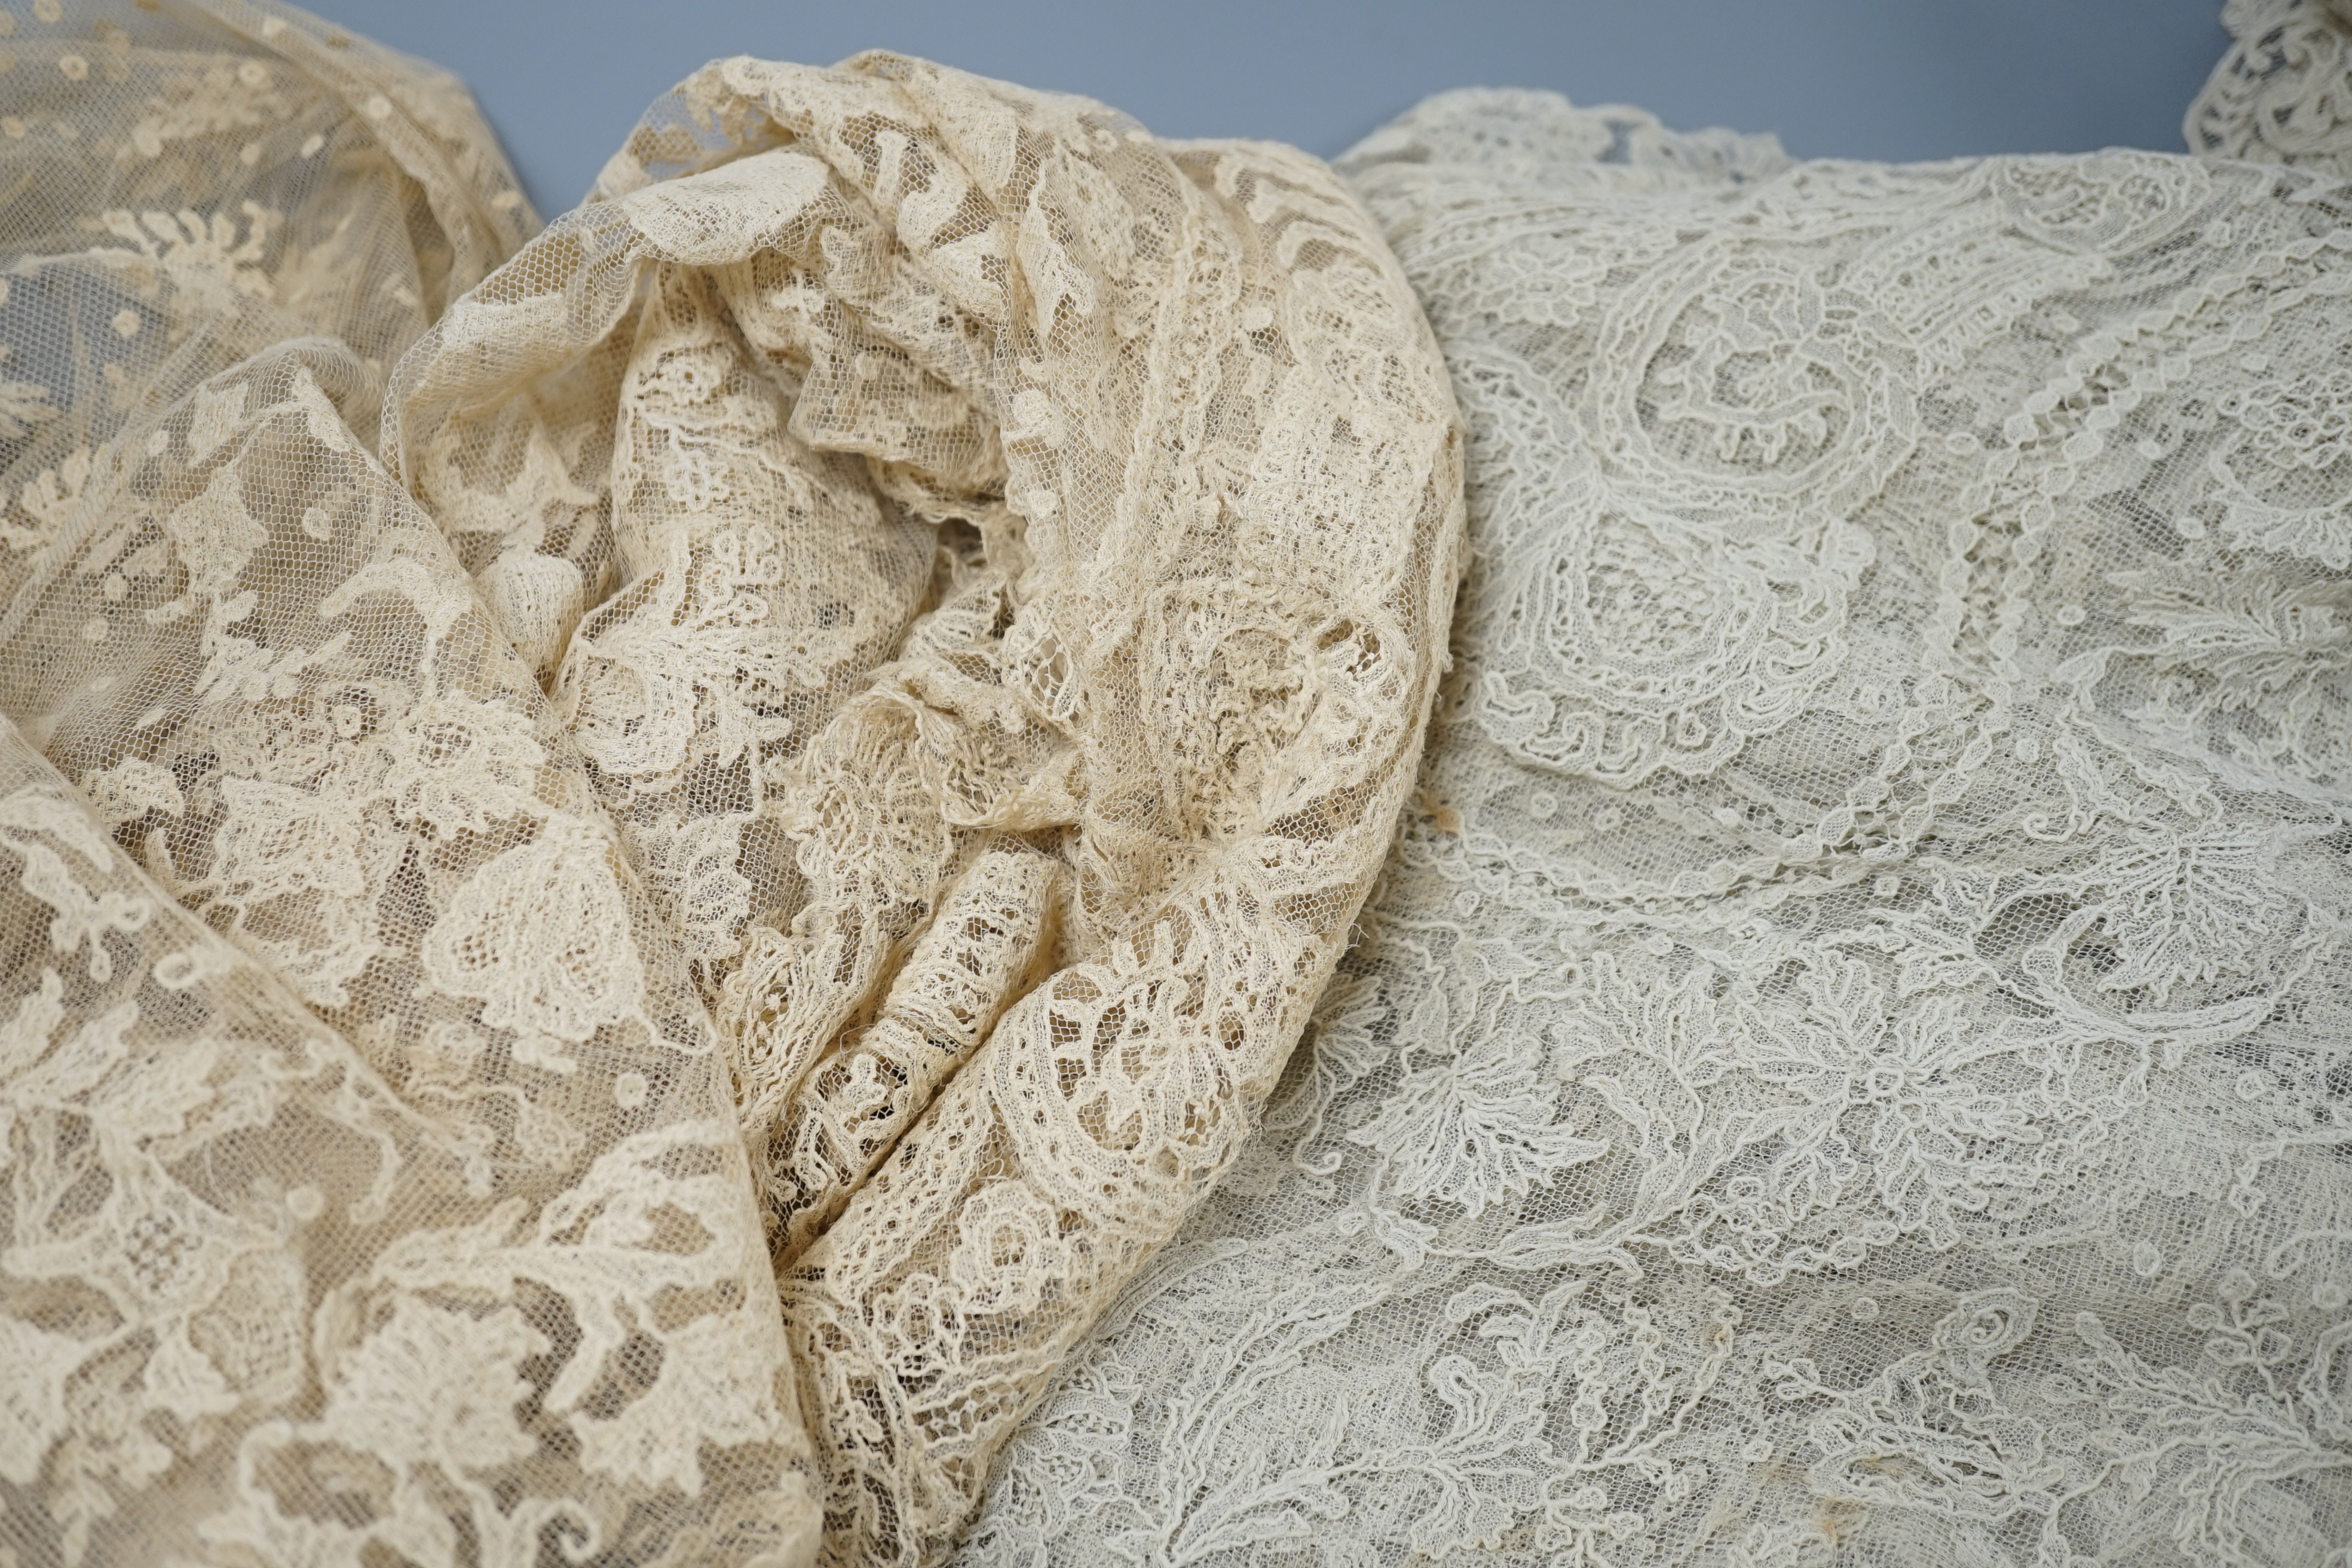 A rare length (9 and a half yards) of Brussels 19th century needle lace, some repairs and damage, circa 1880 and a similar wedding veil